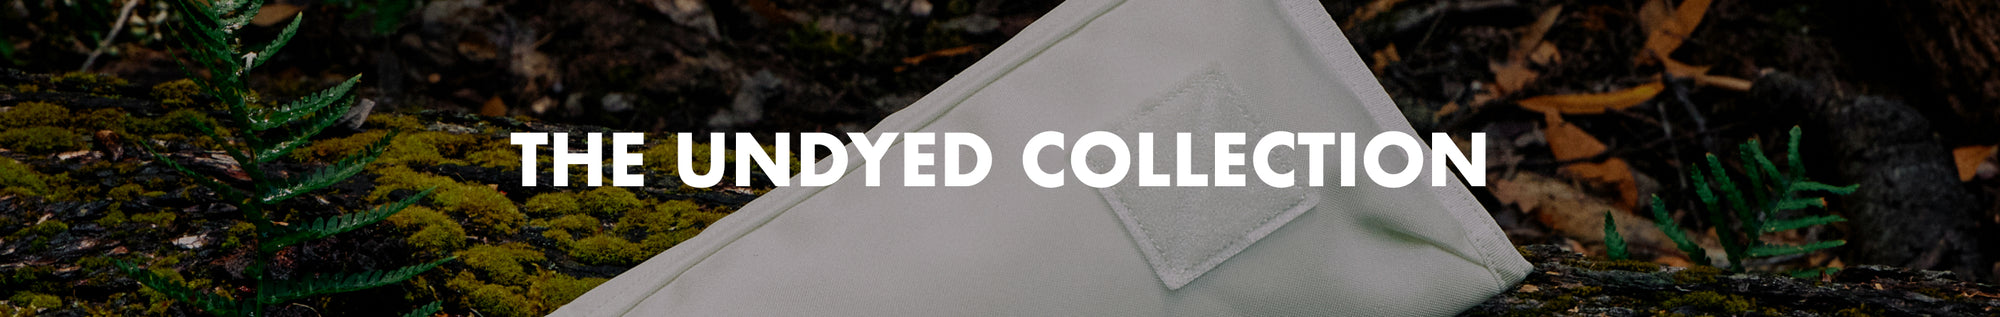 The Undyed Collection